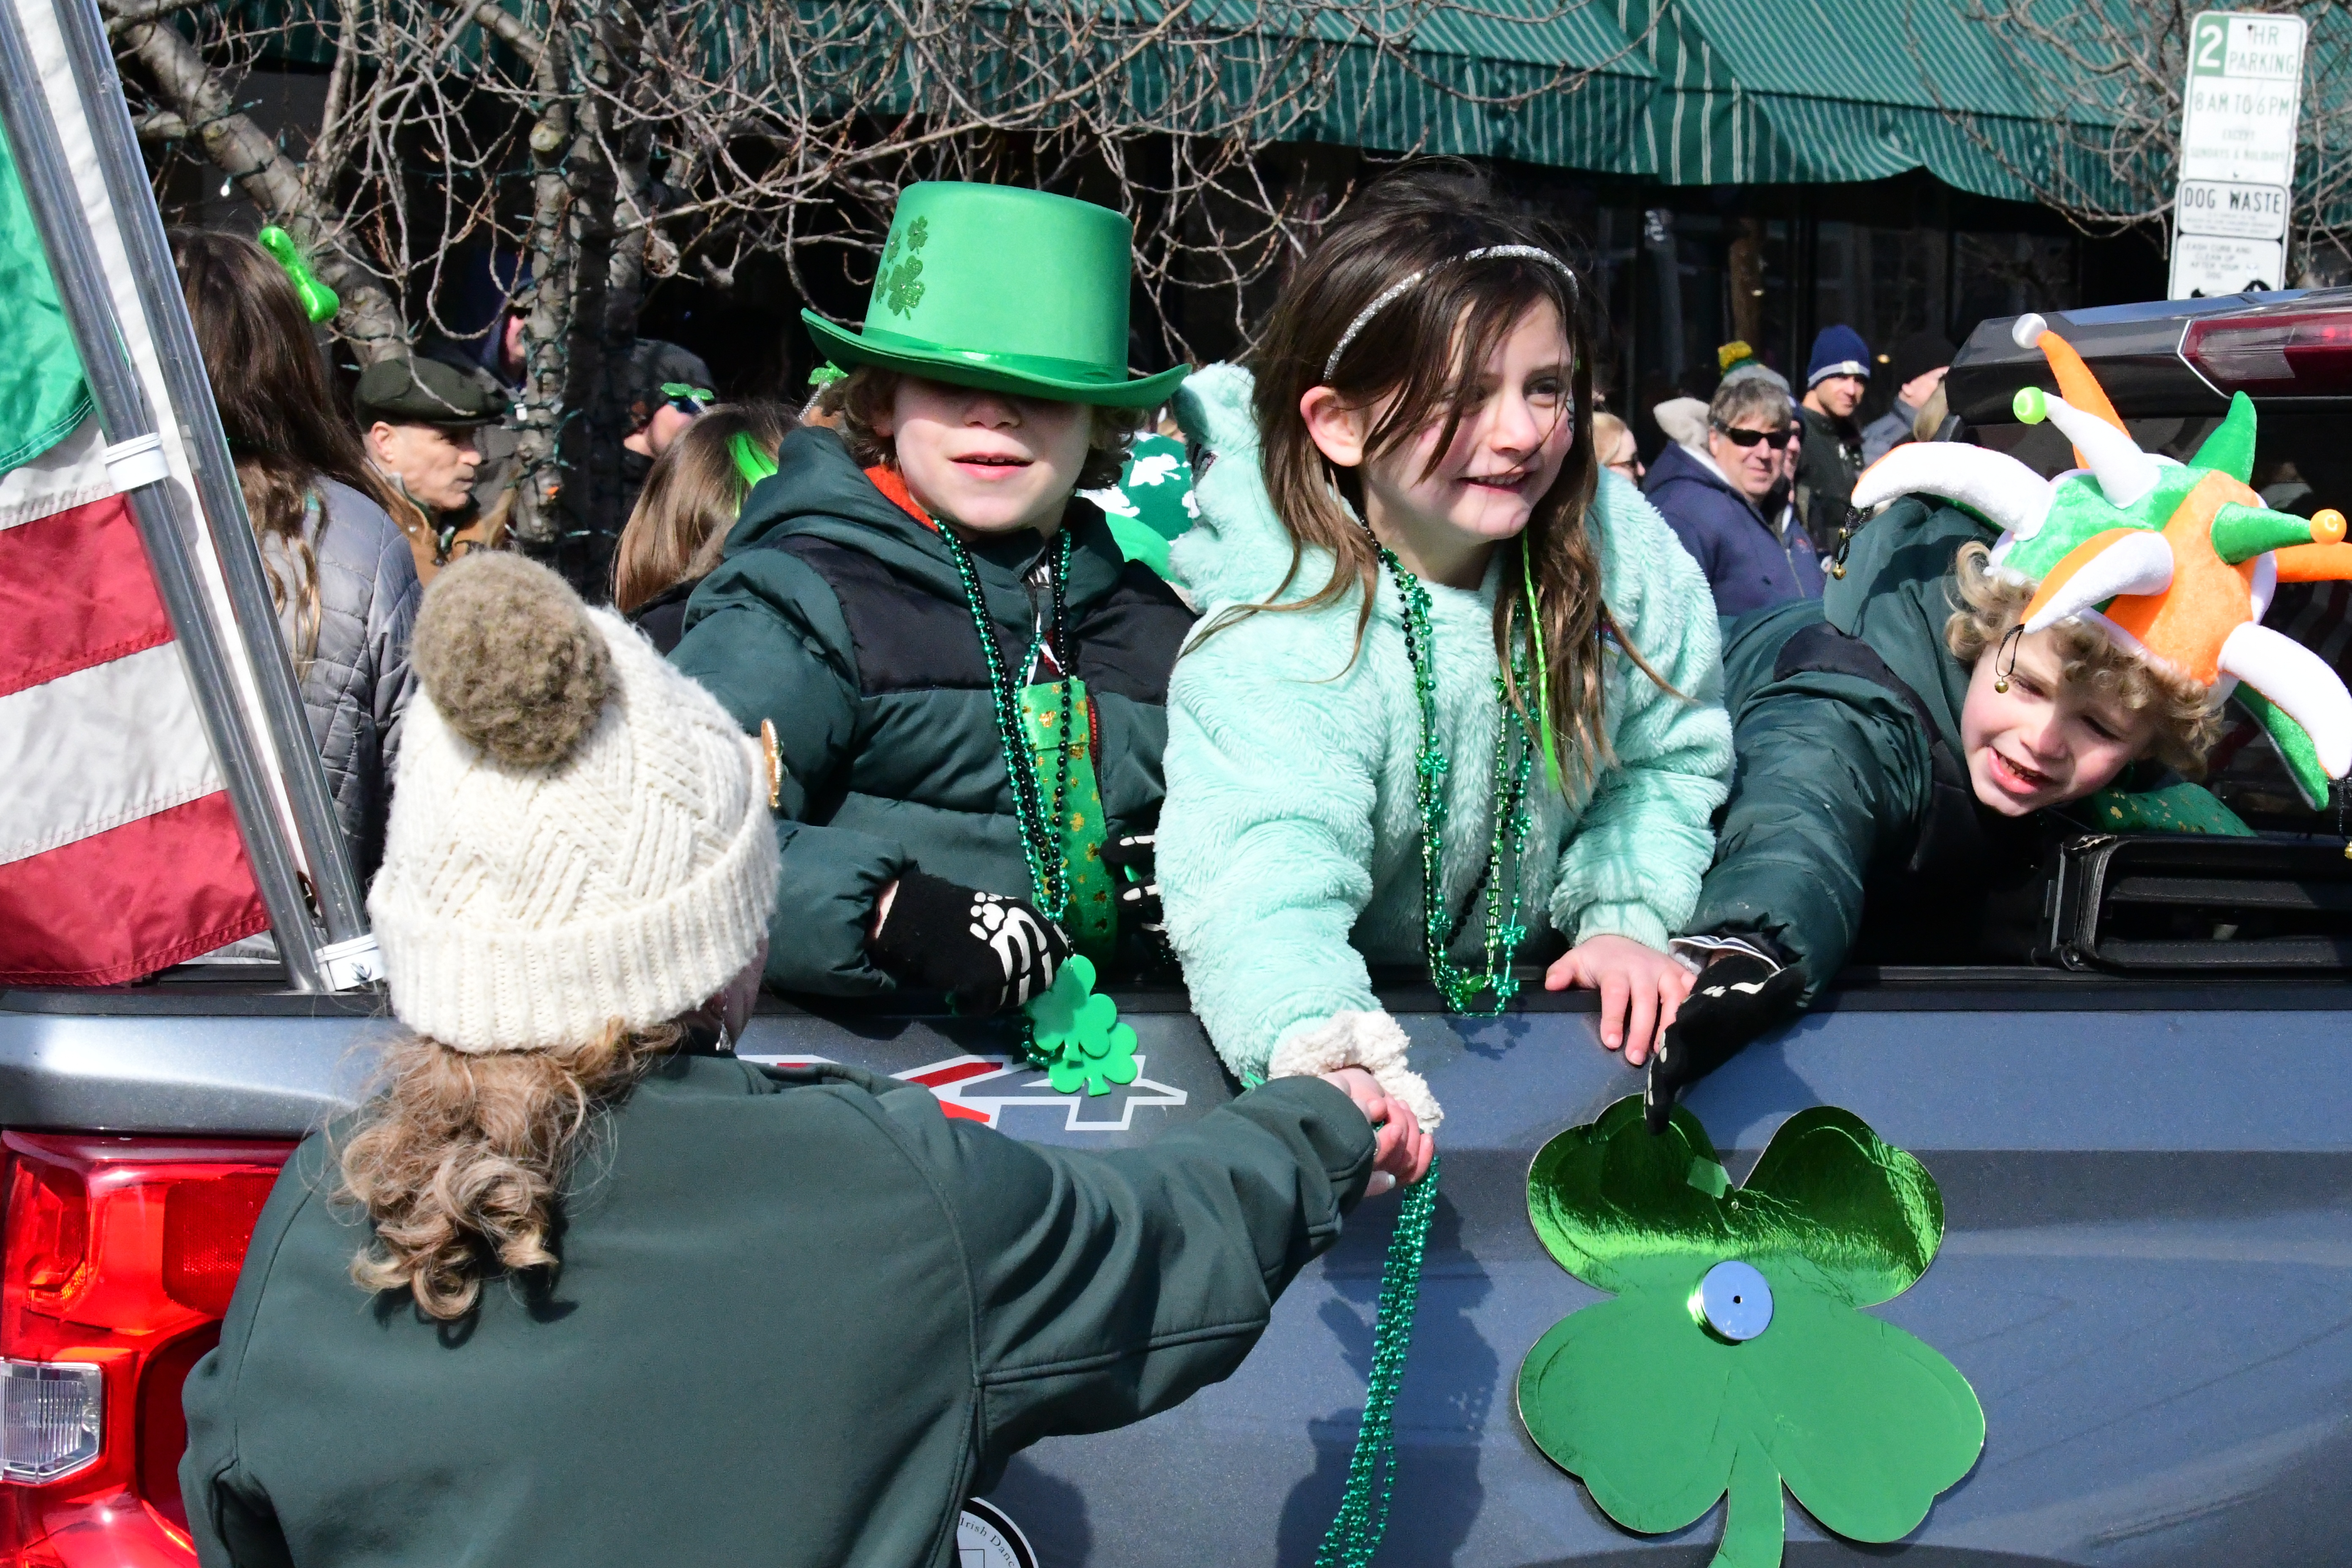 The 2022 St Patrick's Day Parade hosted by the Friendly Sons of St Patrick Hunterdon County took place in Clinton on March 13.

